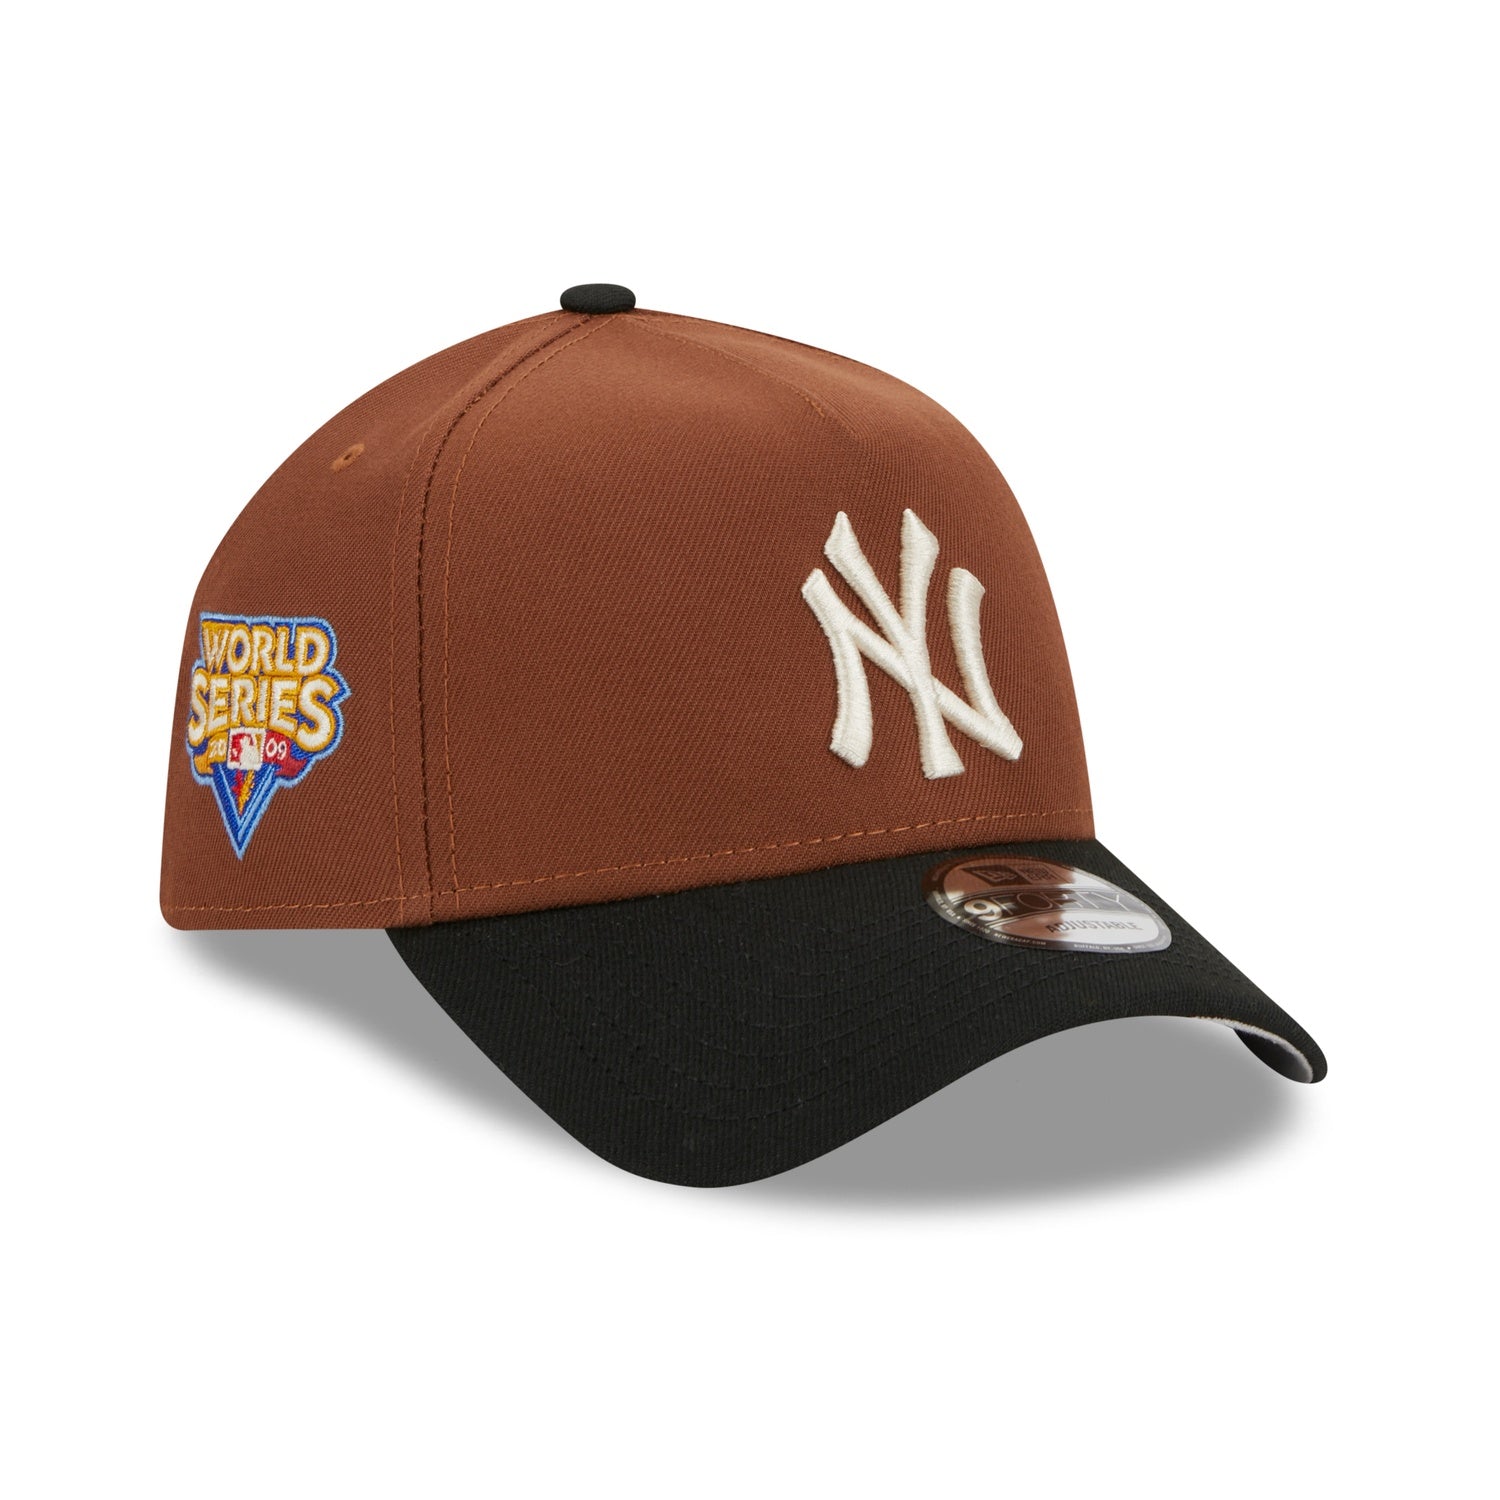 NEW ERA 9FORTY A-FRAME NEW YORK YANKEES WORLD SERIES 2009 TWO TONE